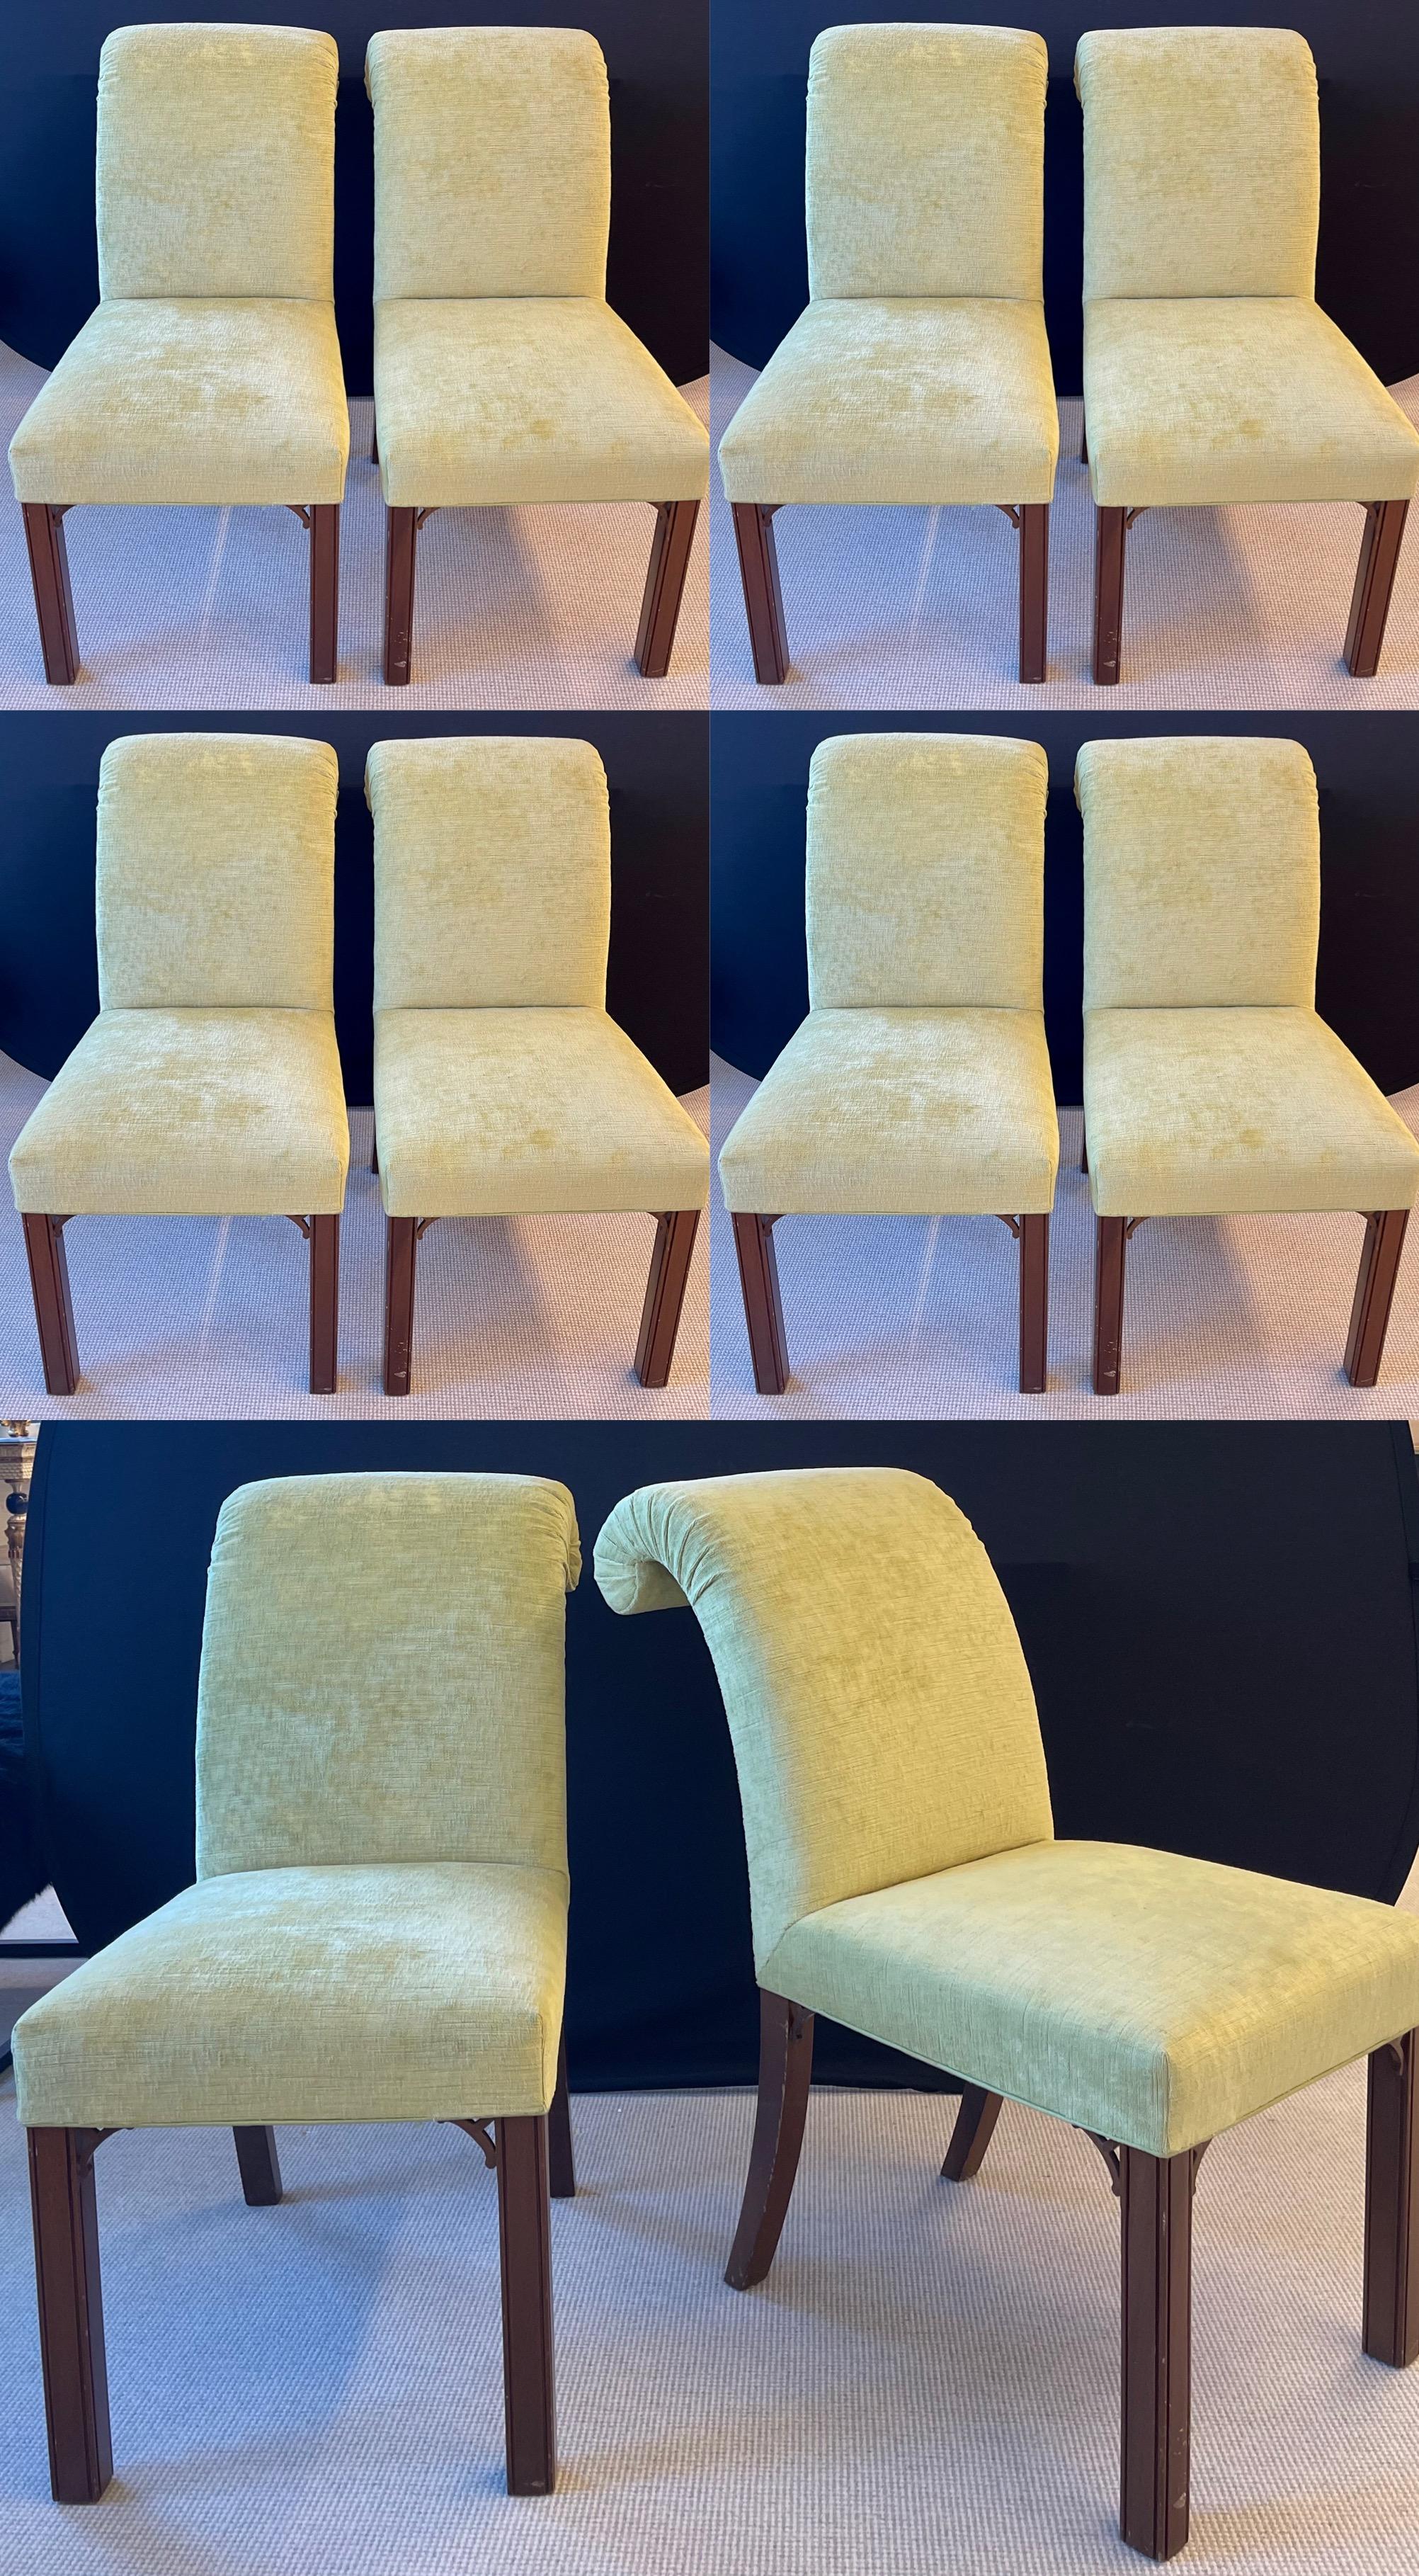 A set of 10 Schneller & Sons Chinese Chippendale sleigh back dining chairs in a very lovely yellow fabric. Strong and sturdy sleek and stylish are these finely custom made dining chairs. Can purchase as many as are needed. 

The provenance of this